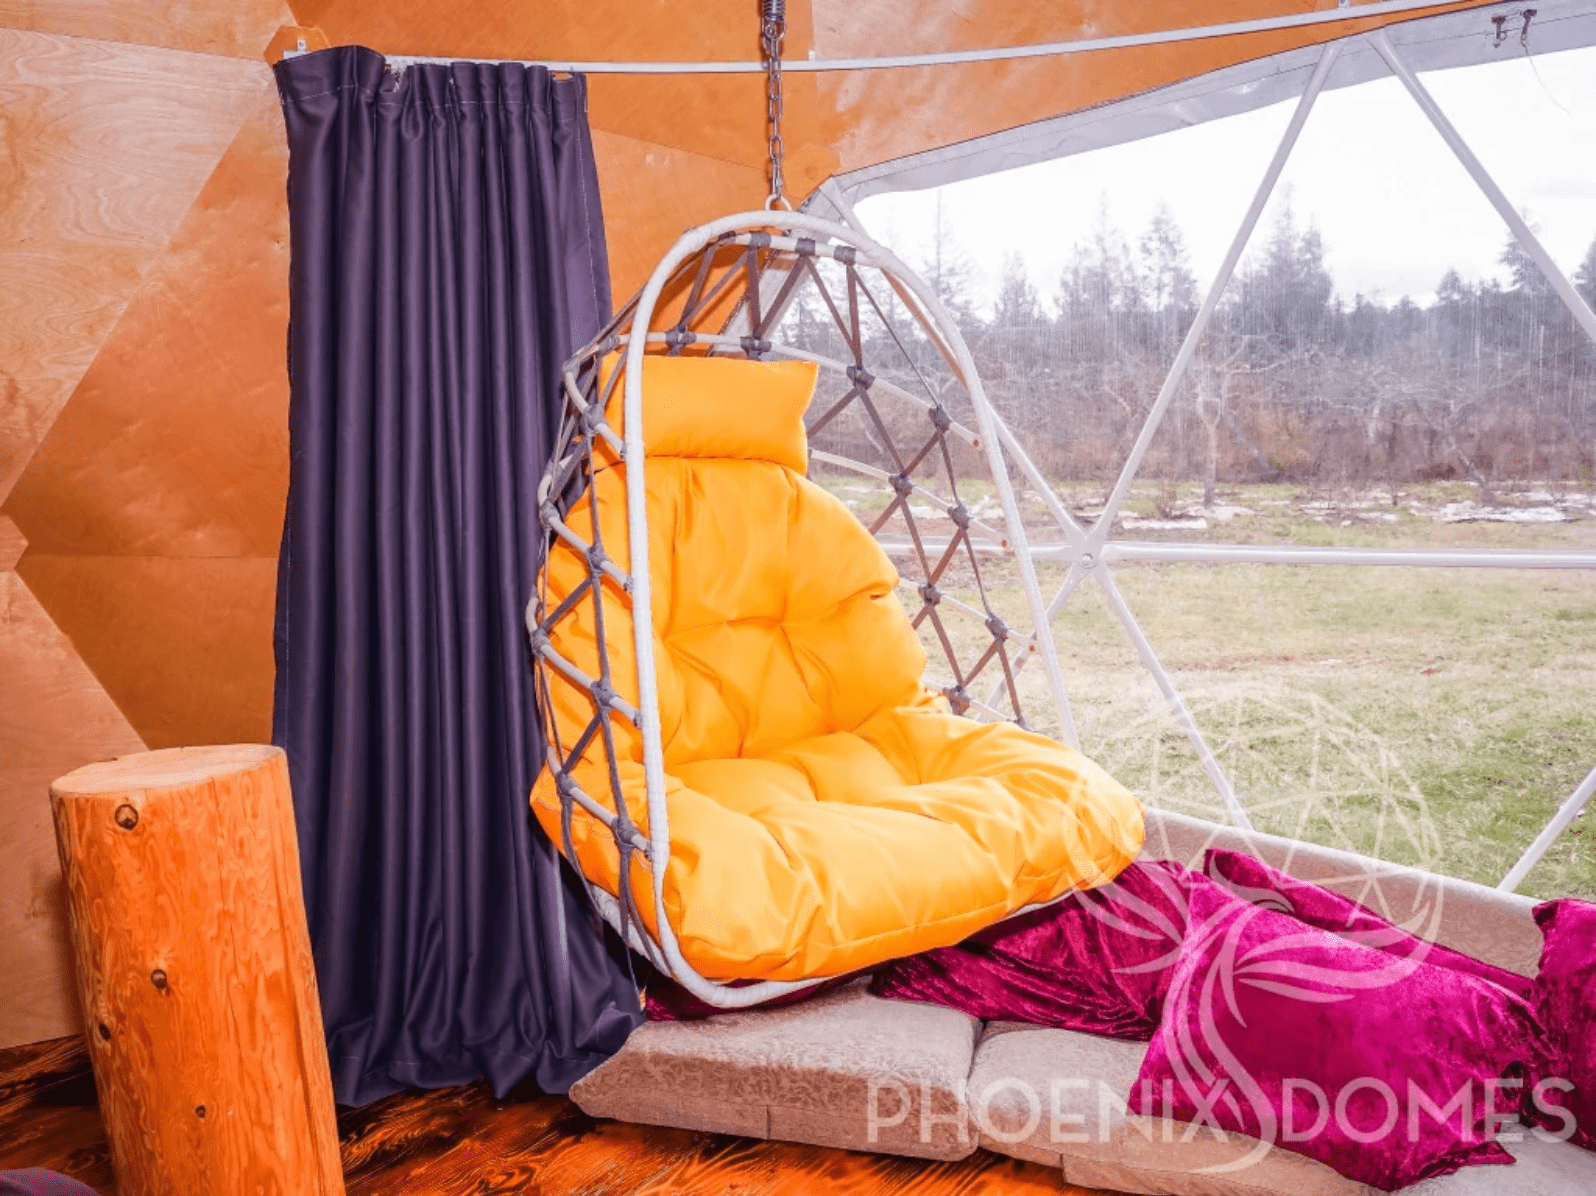 PHOENIX DOMES Rope Chair - Summer Yellow - Single/Double Hanging Chair for Phoenix Domes Geodesic Dome